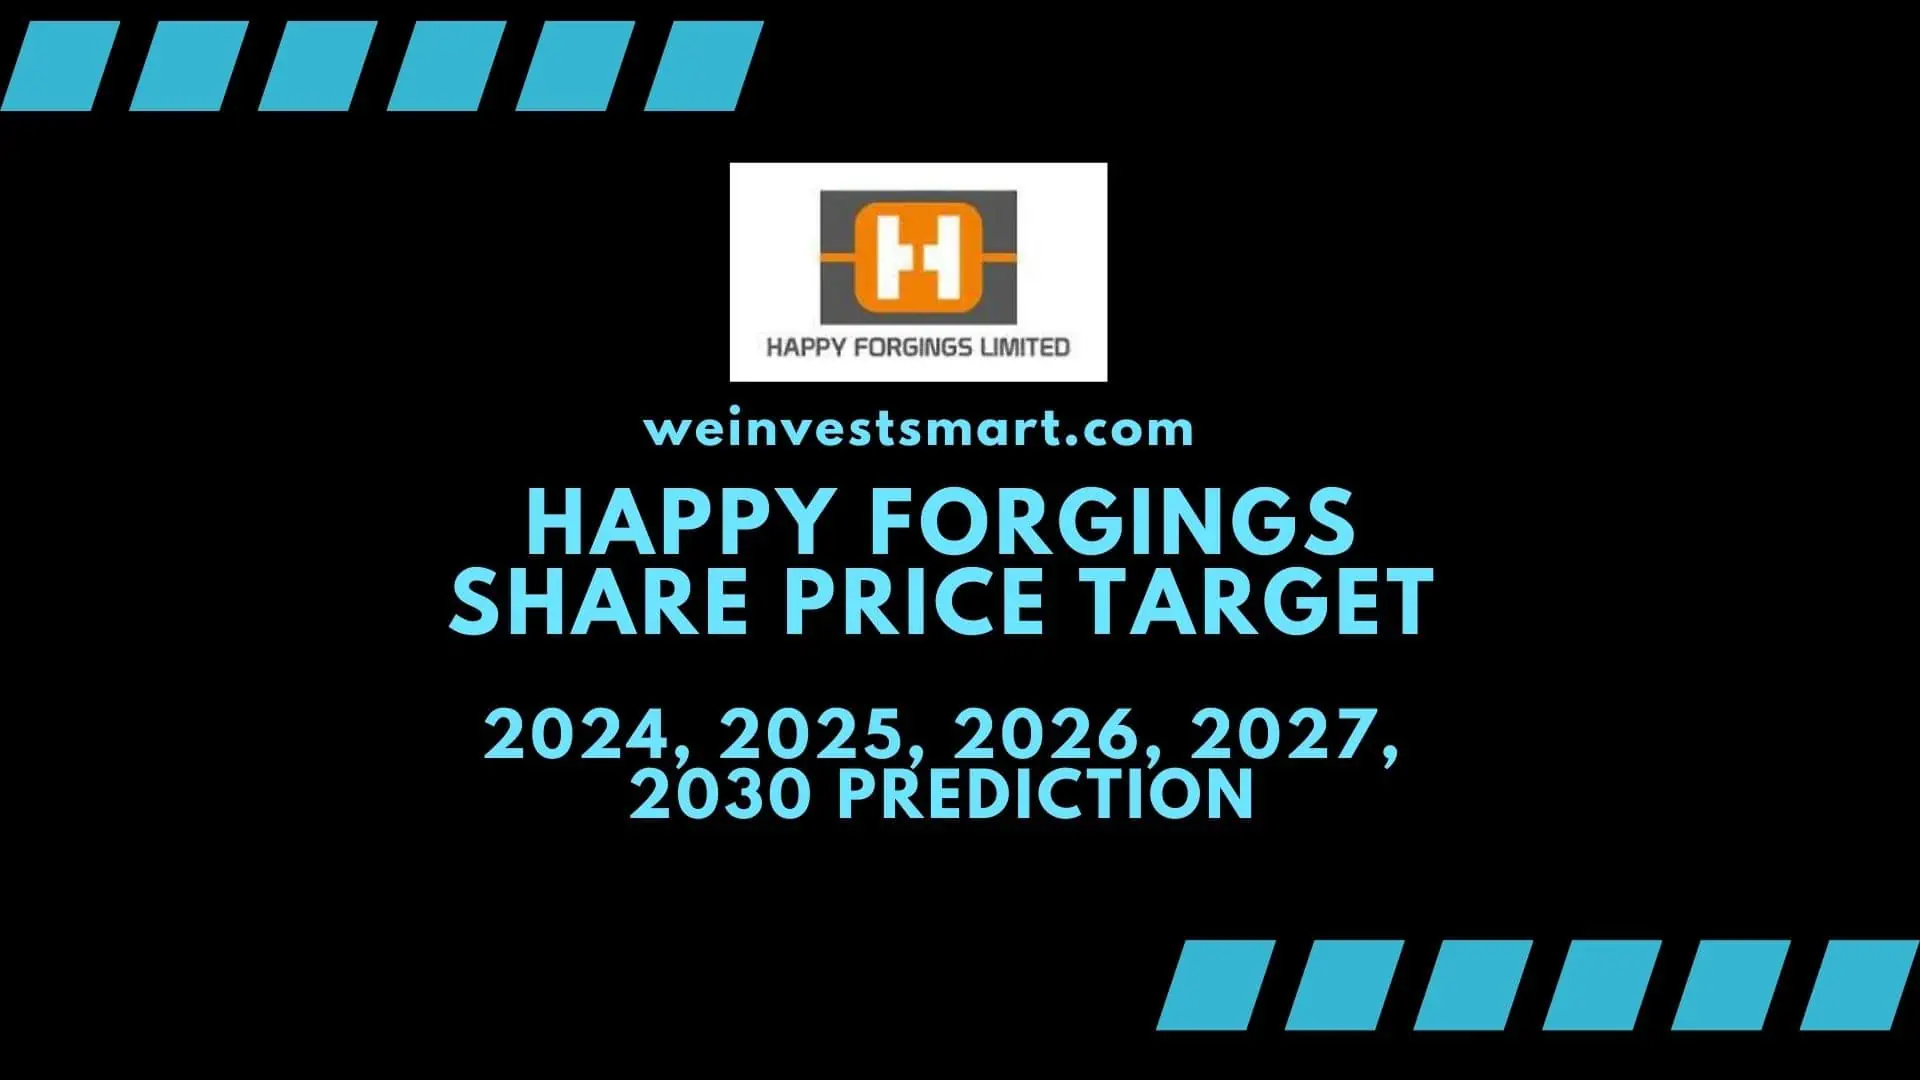 Happy Forgings share price target 2024, 2025, 2026, 2027, 2030 prediction